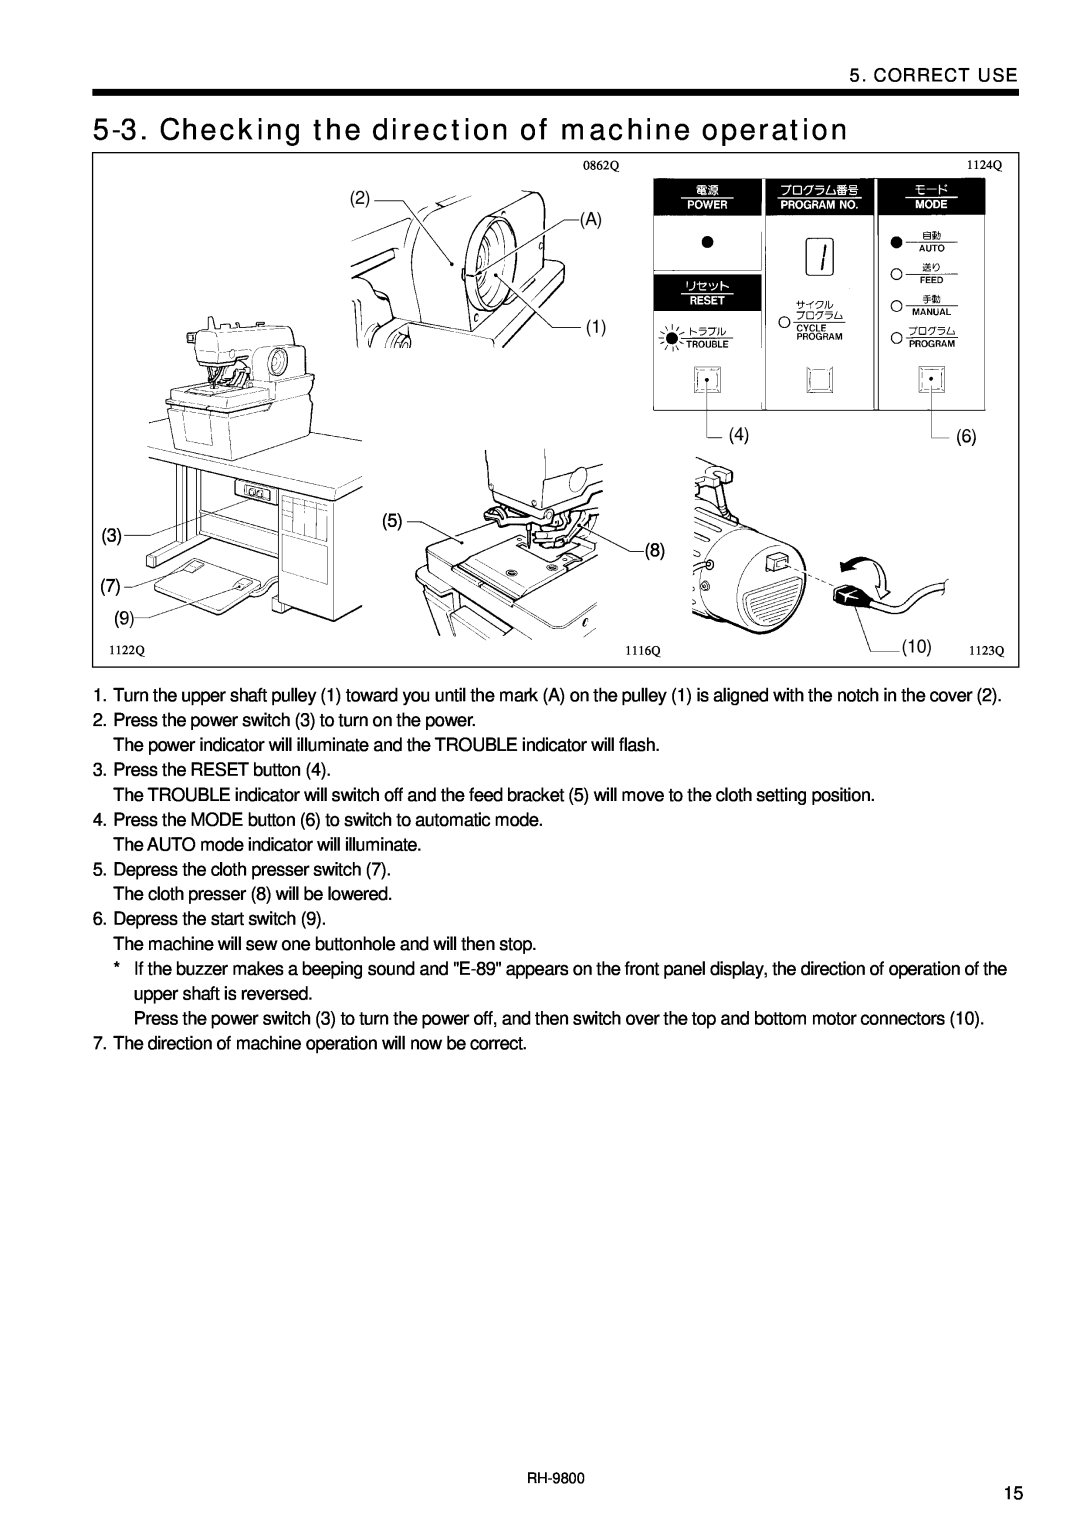 Brother DH4-B980 instruction manual Checking the direction of machine operation, Correct Use 